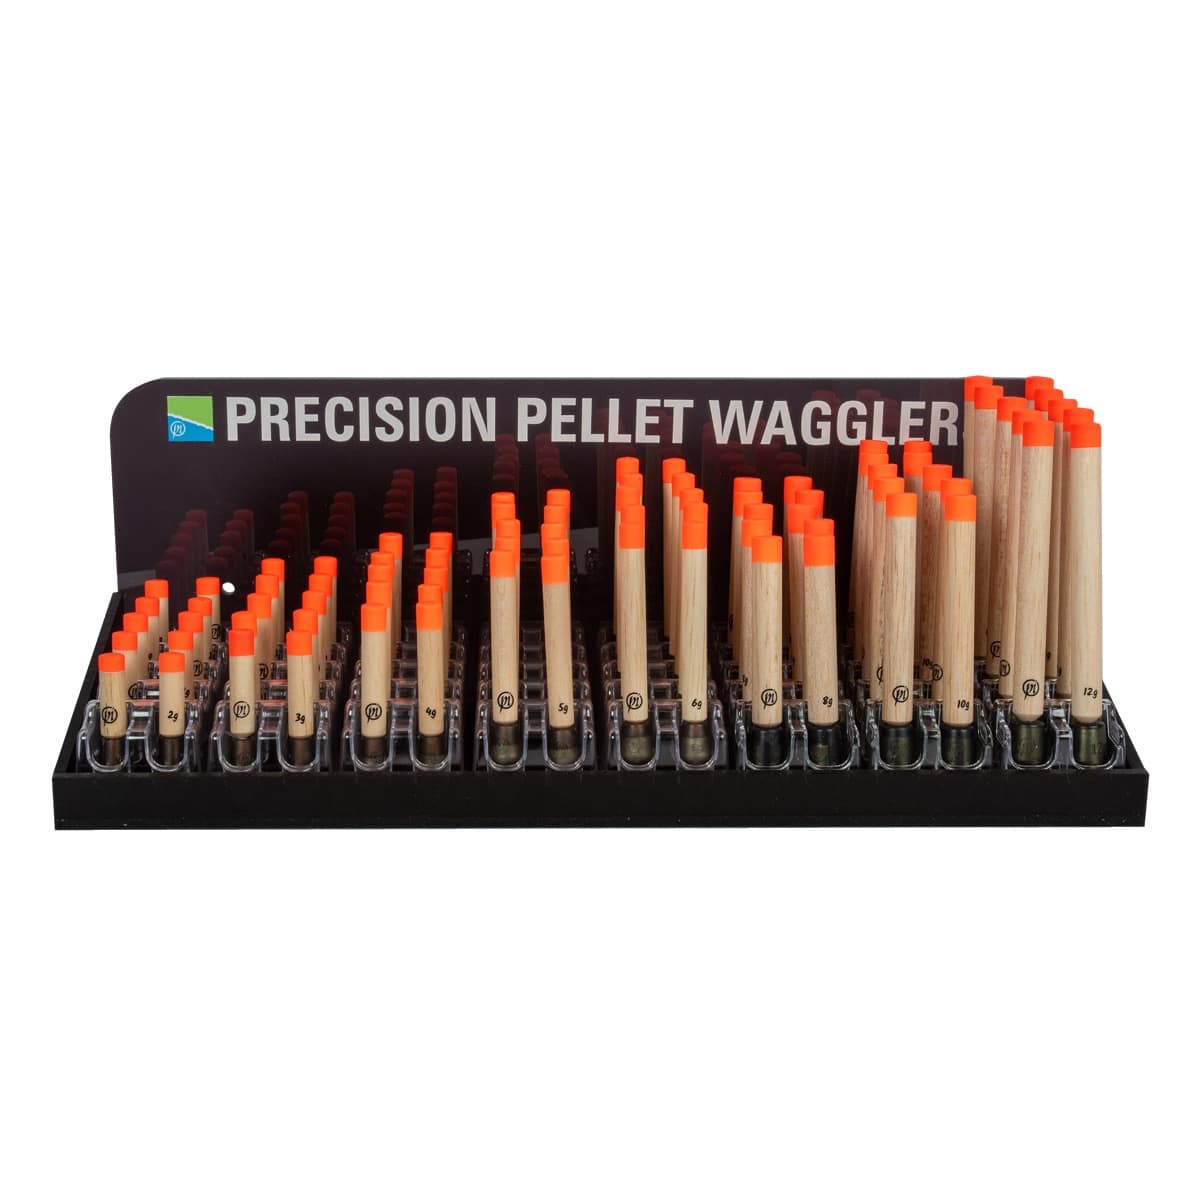 Precision Pellet Waggler